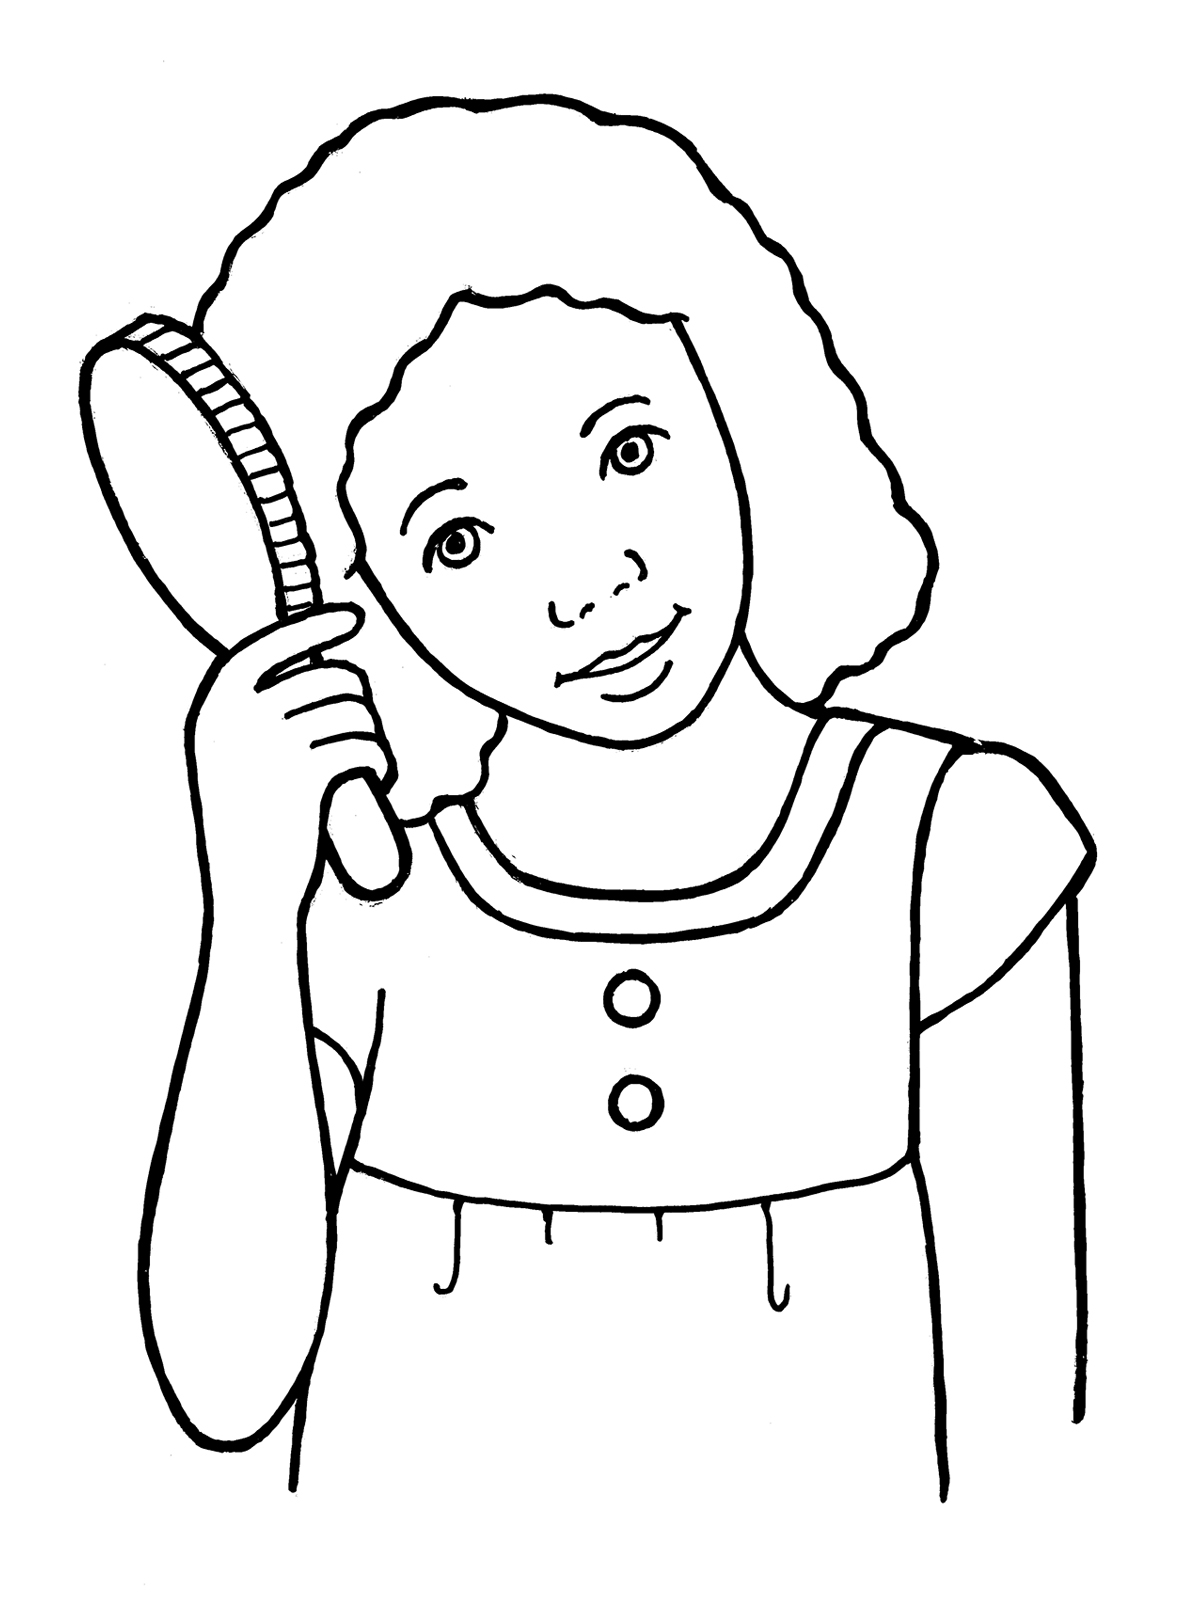 Comb hair clipart black and white 